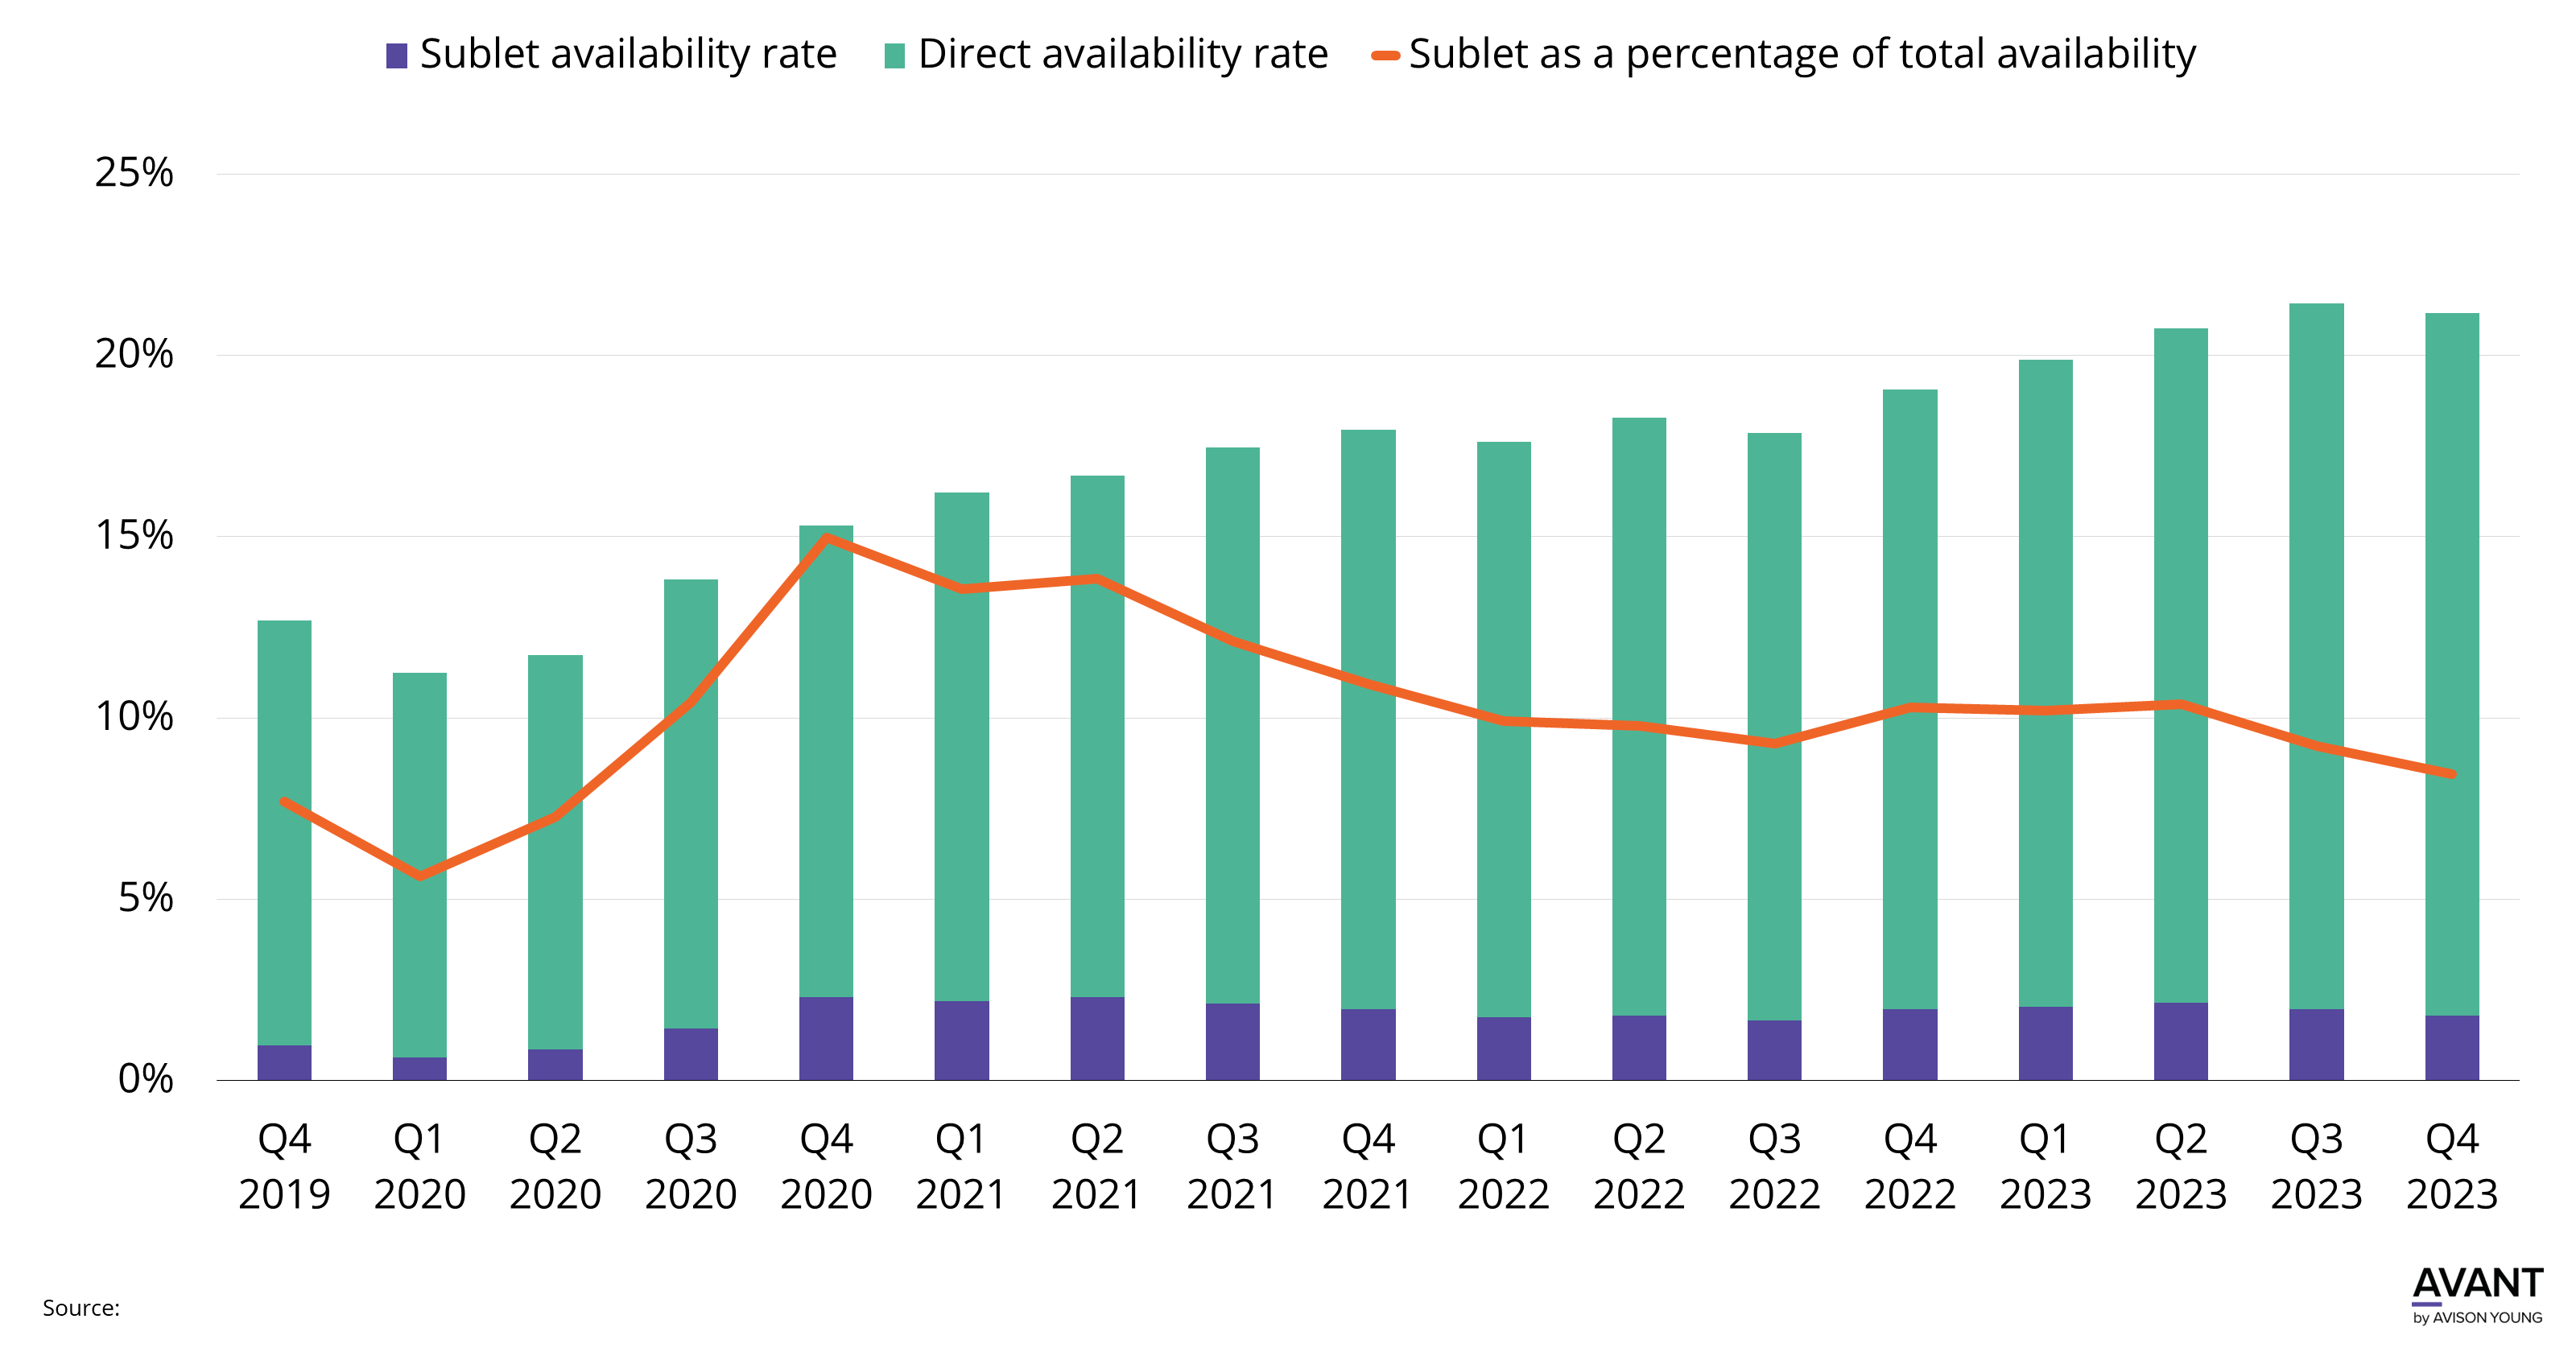 Chart comparing sublet, direct and total avialability in Downtown Montreal commercial real estate market from Q4 2019 to Q4 2023 